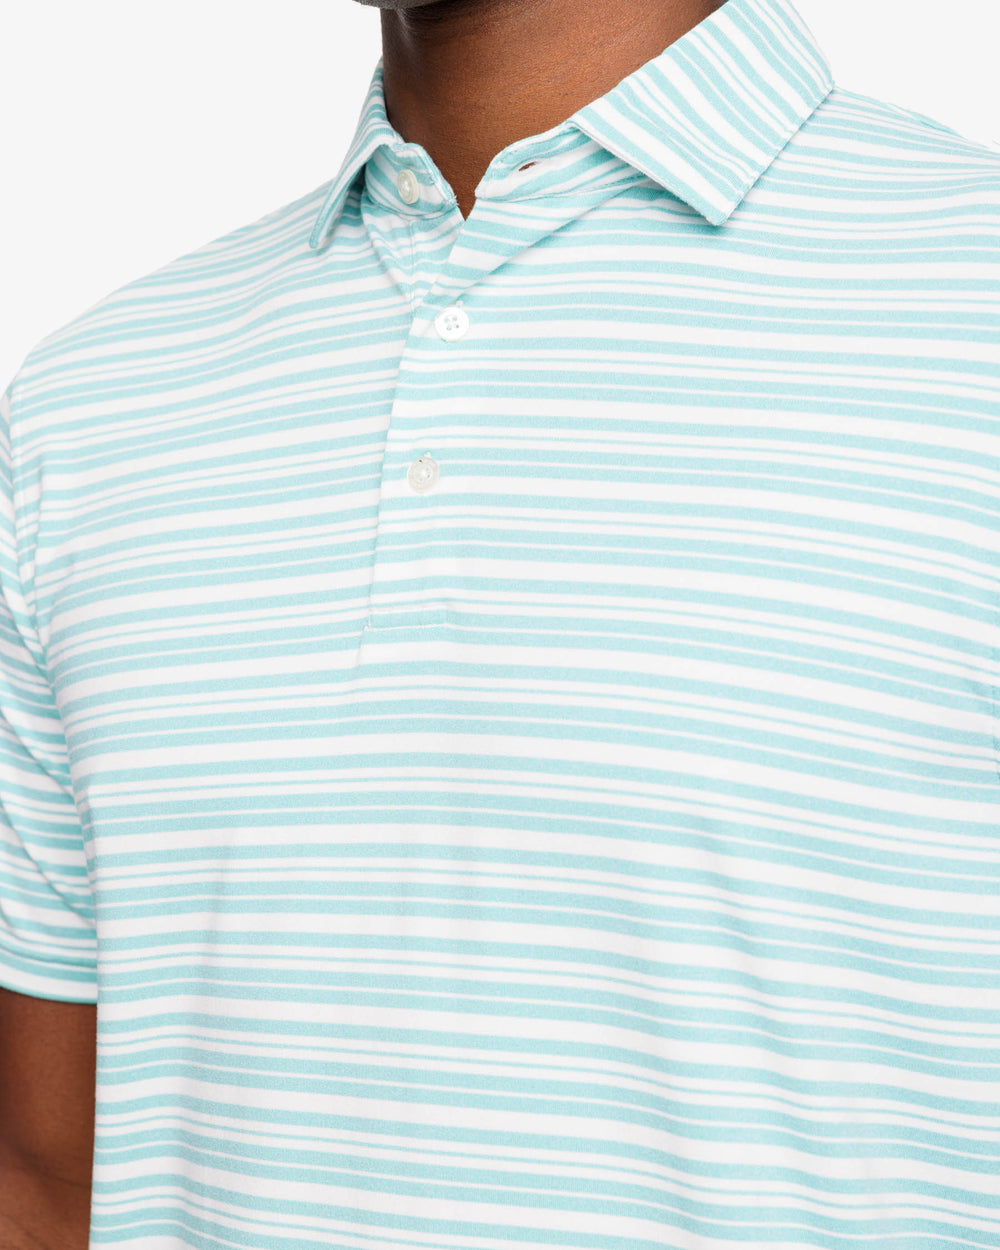 The detail view of the Southern Tide Ryder Heather Bombay Striped Polo Shirt by Southern Tide - Heather Tidal Wave